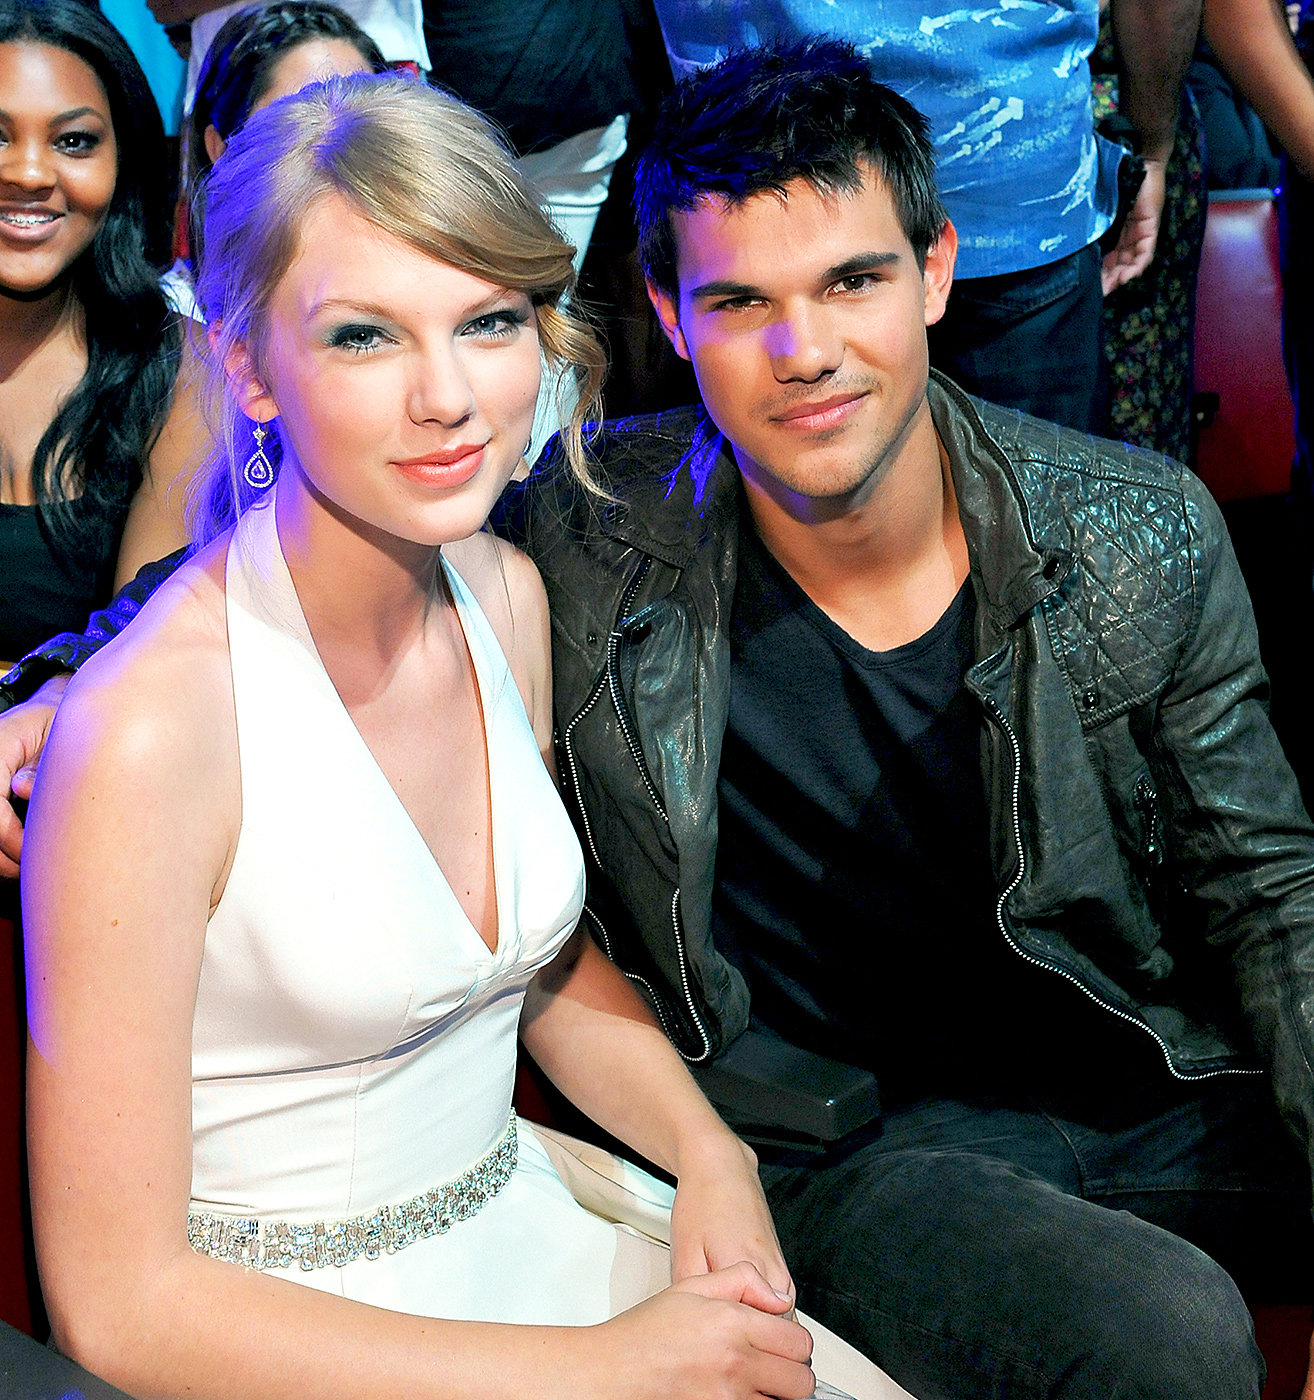 Taylor Swift's dating history: A timeline of her famous